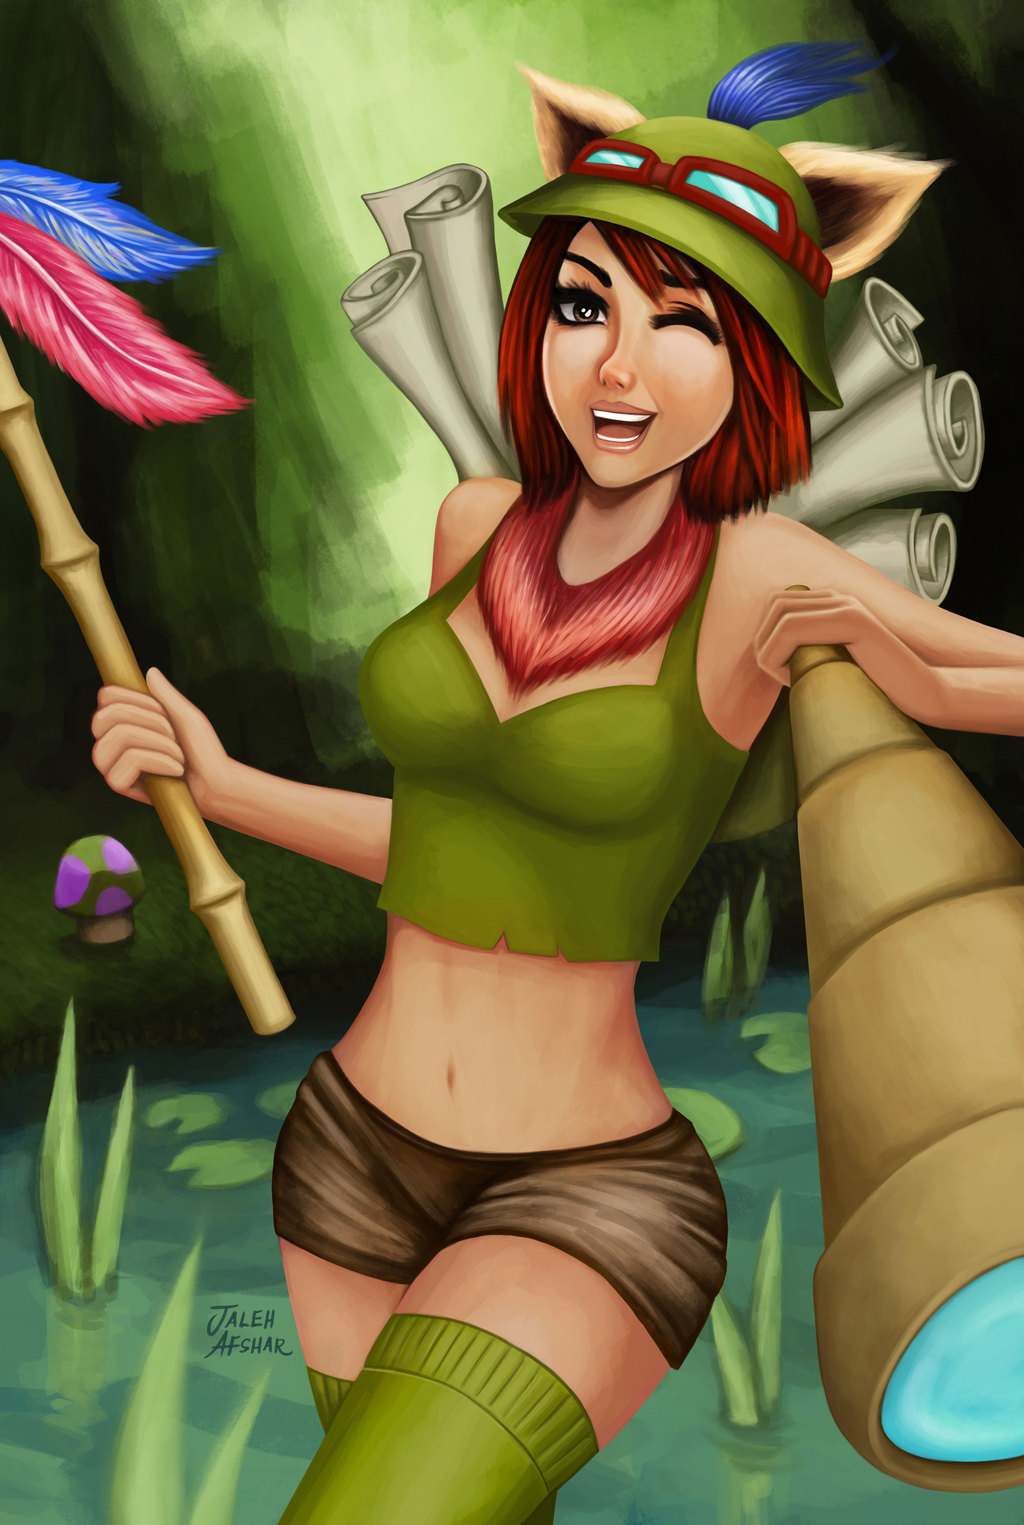 Most recent image: Teemo Girl